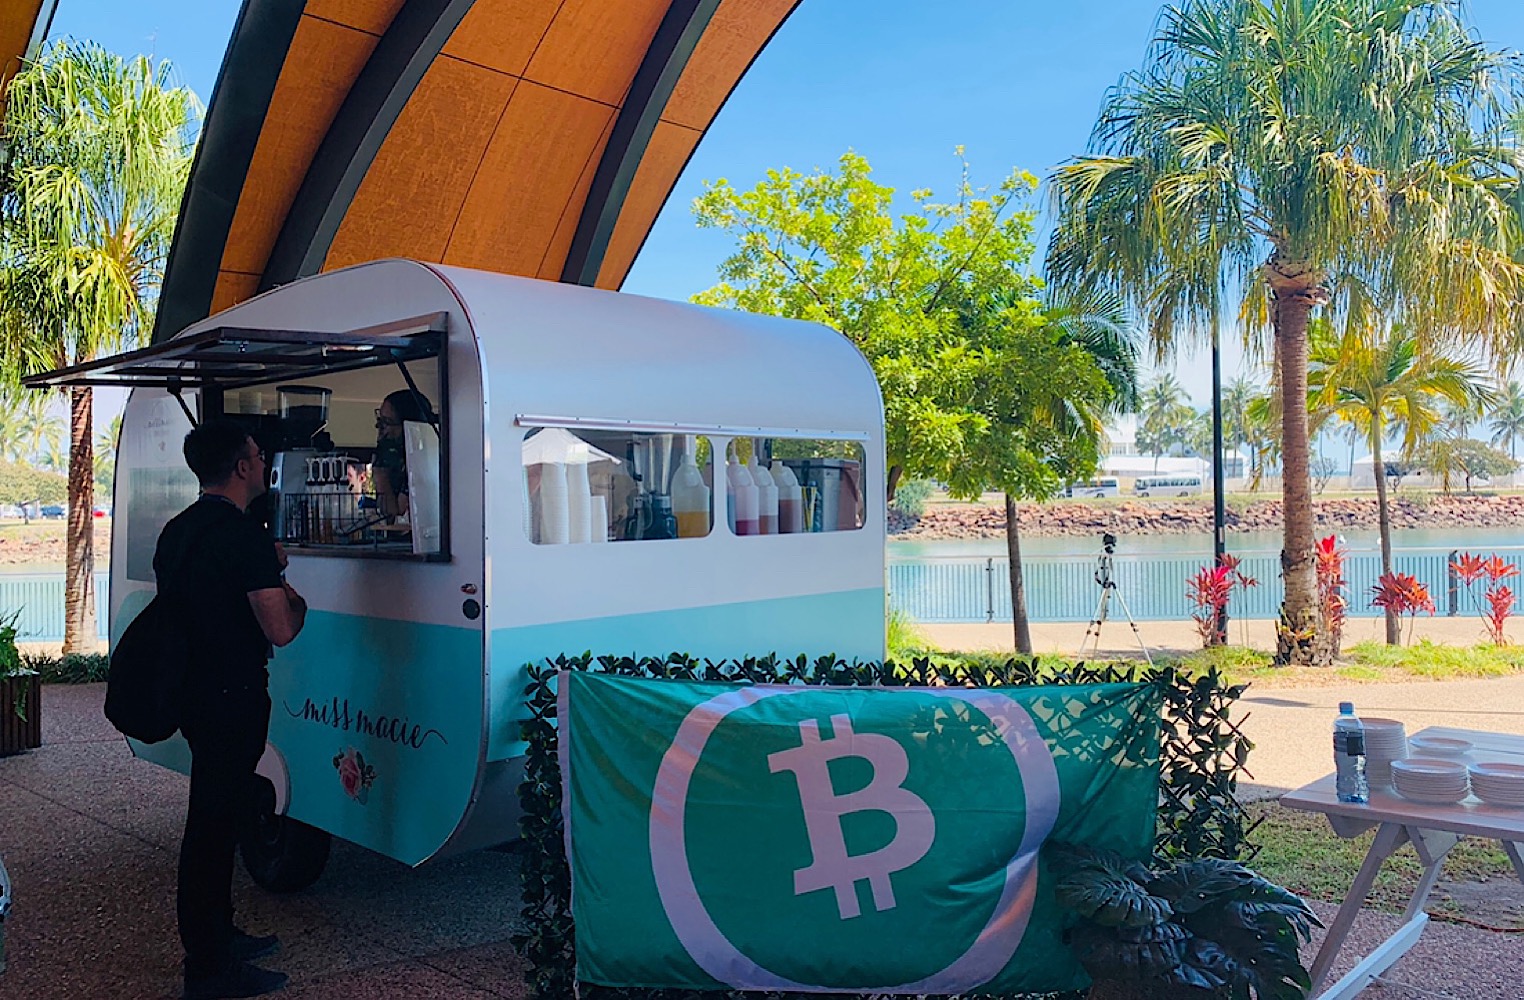 The 3 Top Drivers of Crypto Adoption – BCH City Wrap-Up